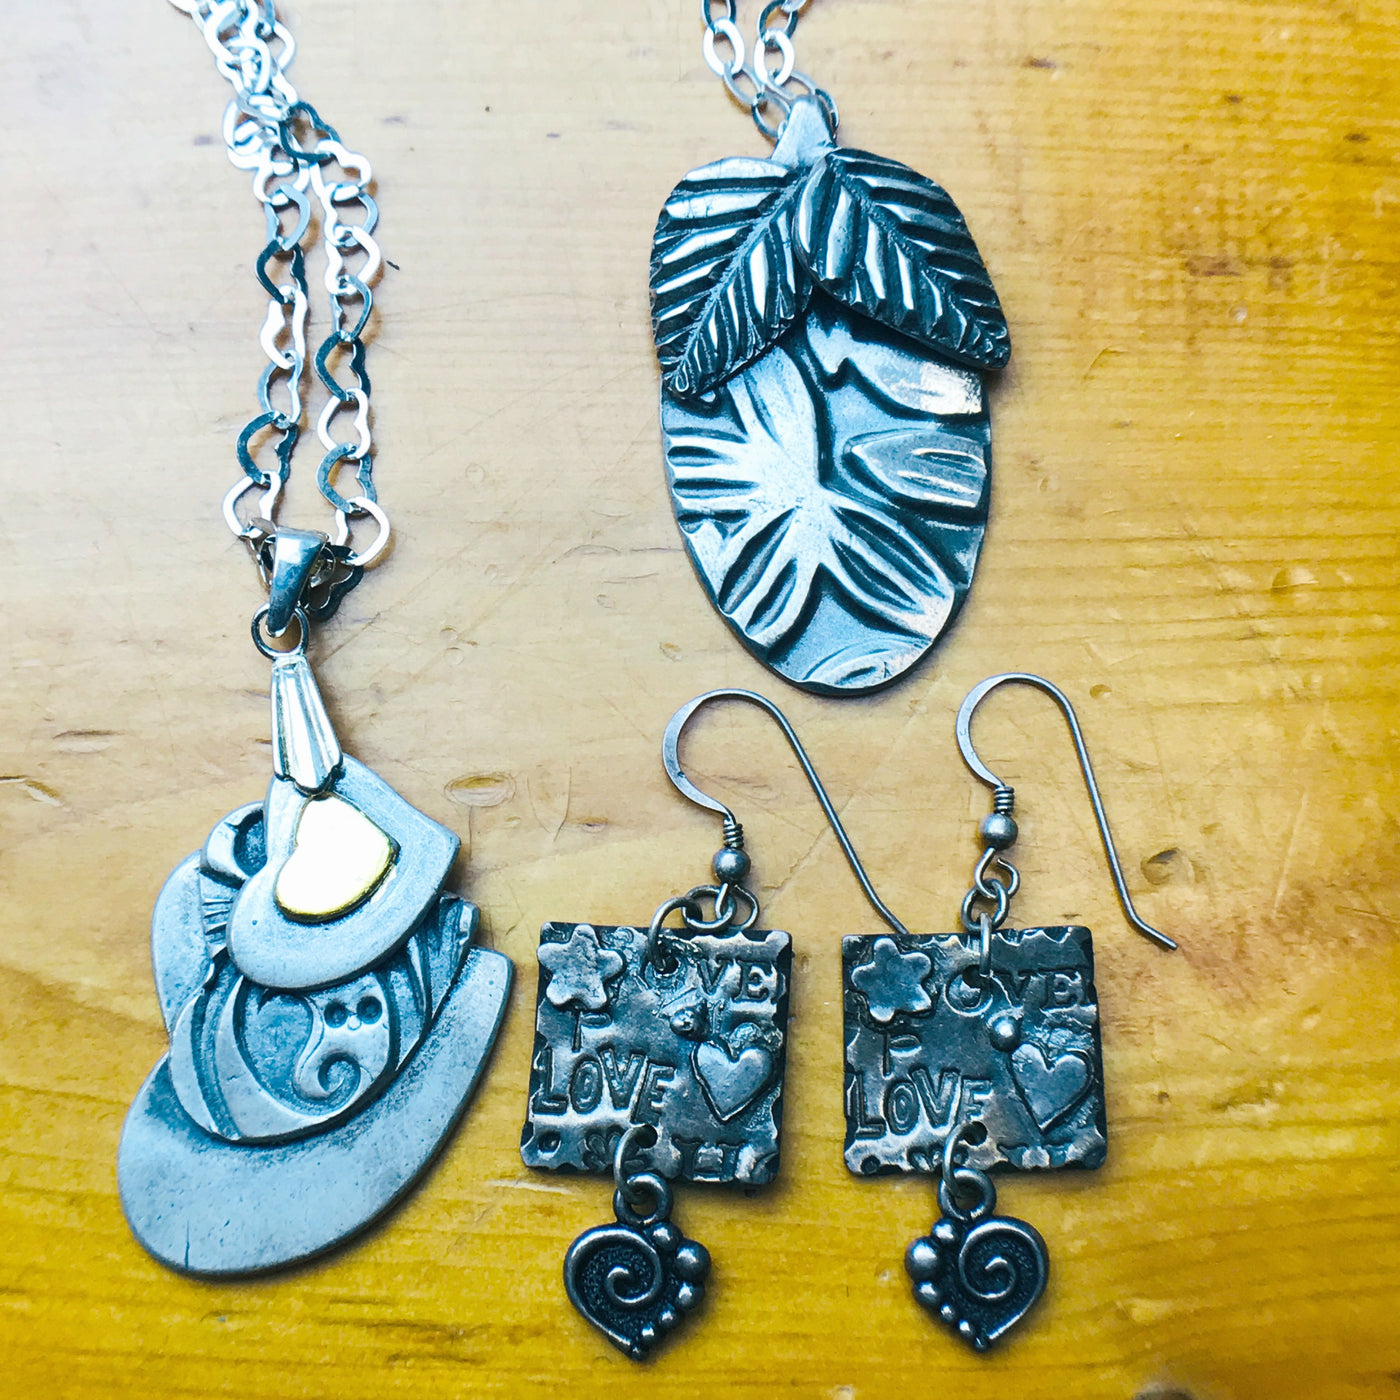 Free Metal Clay Jewelry Project Video: Make a Lentil Pendant, Jewelry